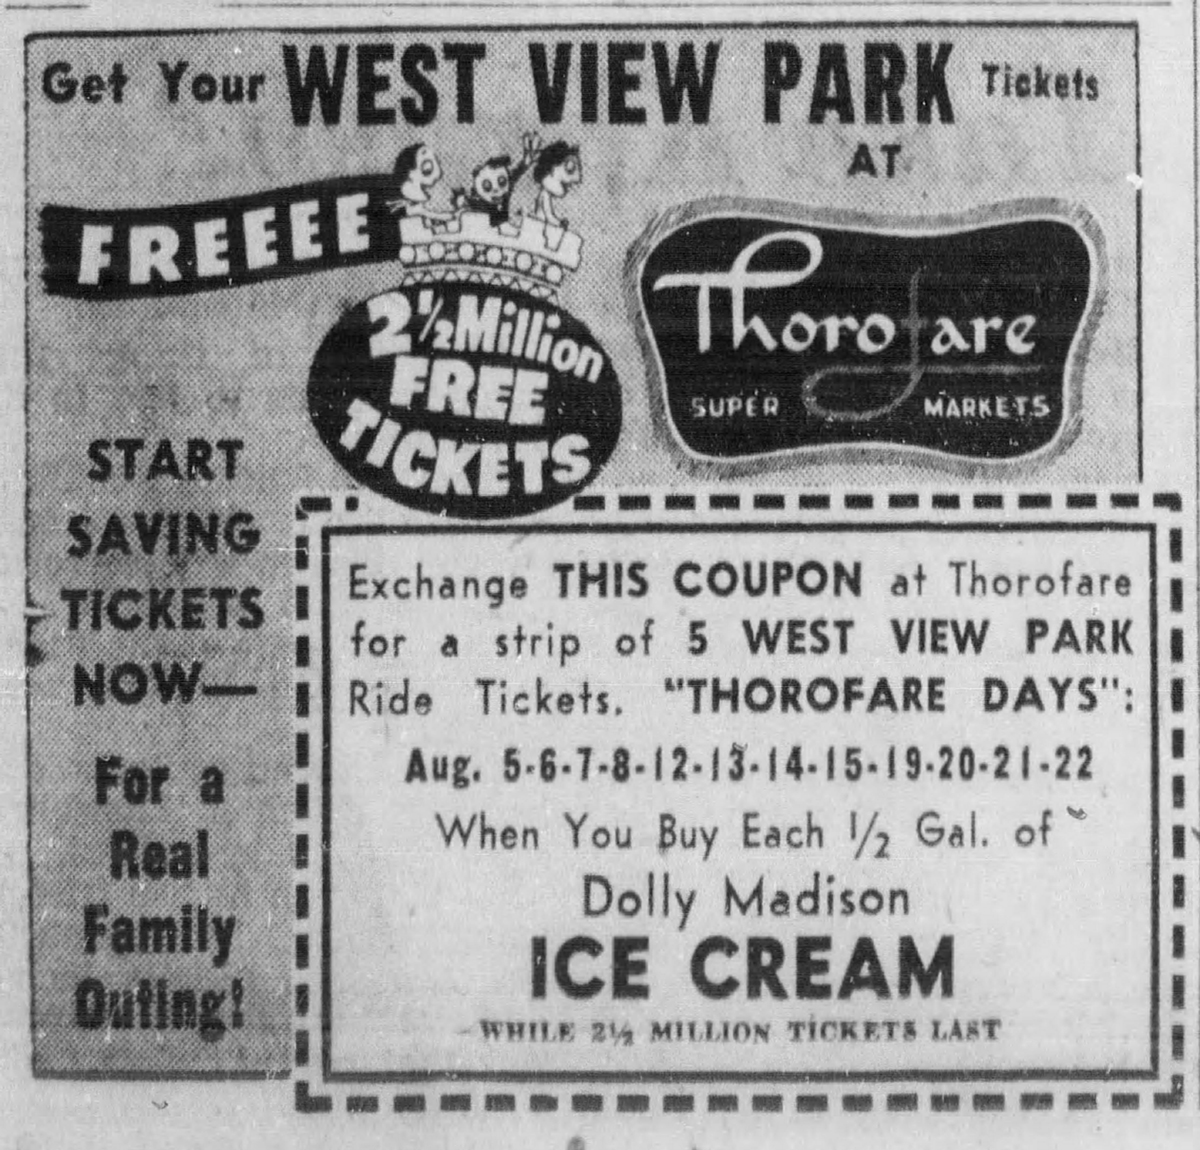 Advertisement and product coupon for West View Park’ s “Thorofare Day” promotion. From the Pittsburgh Post-Gazette, July 24, 1958. | Heinz History Center